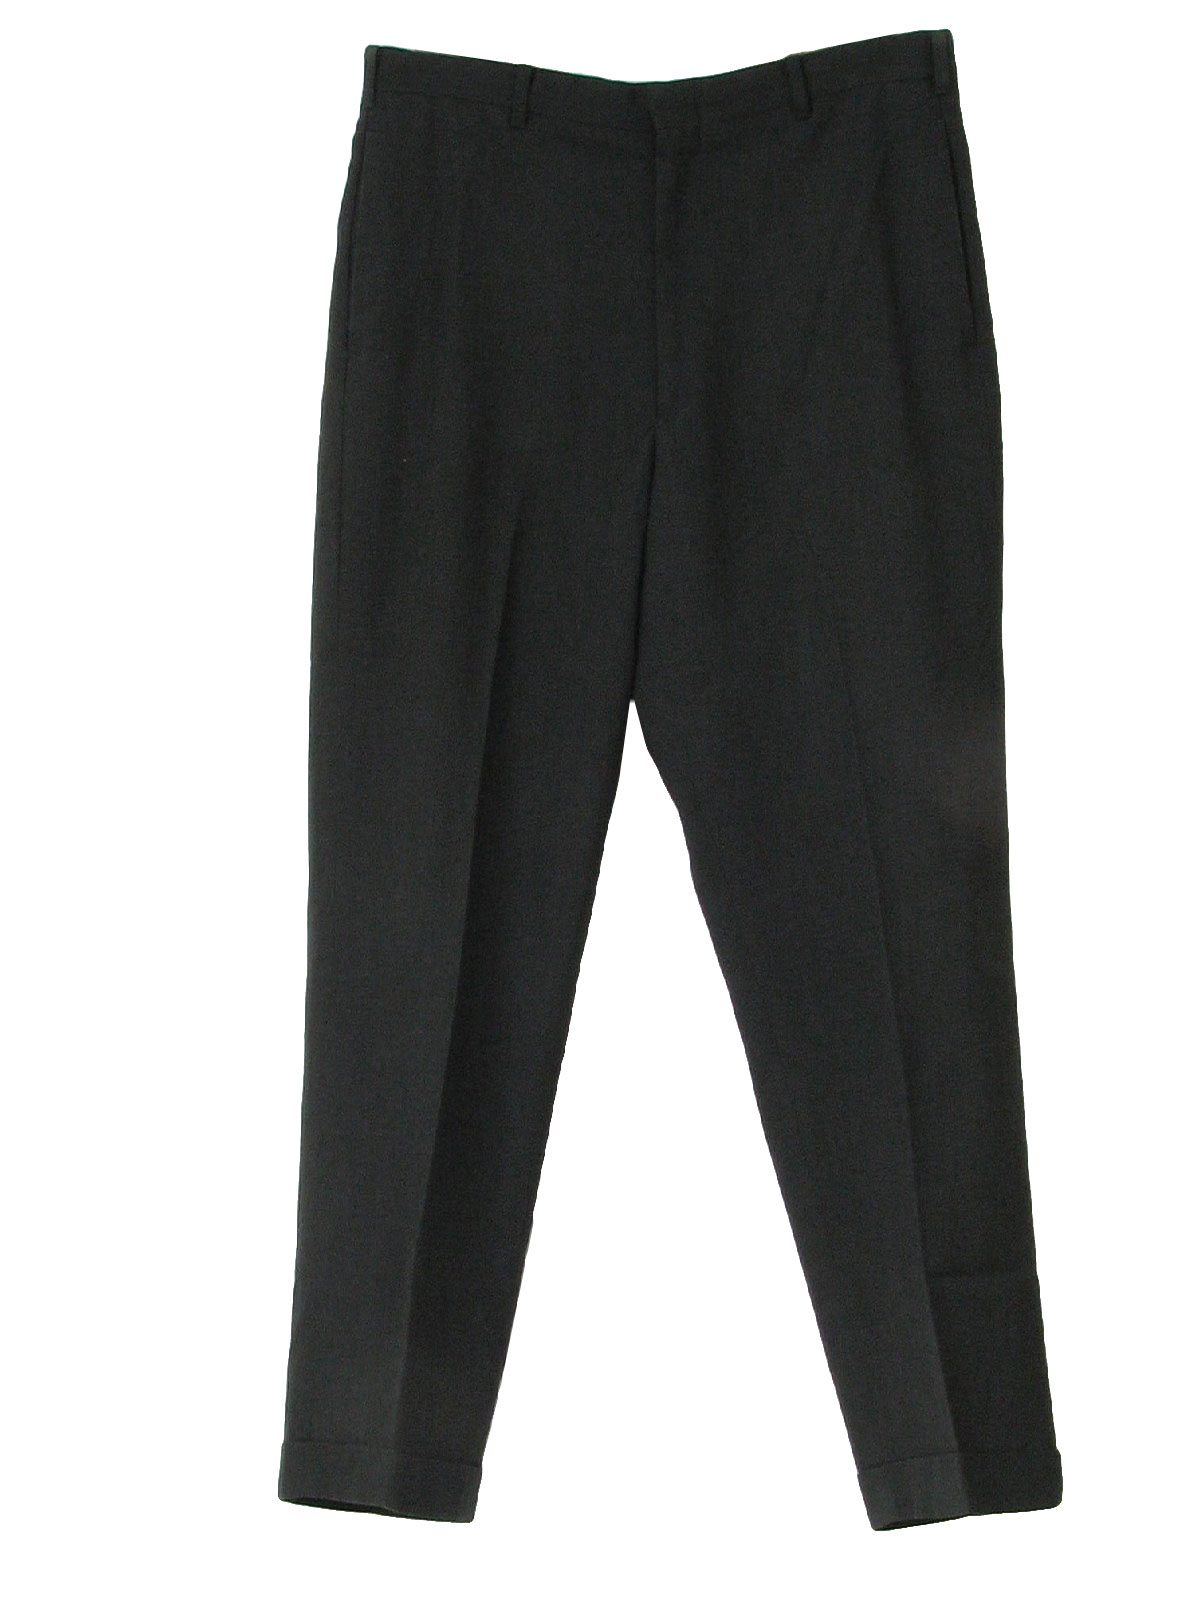 60s Pants: 60s -No Label- Mens black figured wool mod pants with wide ...